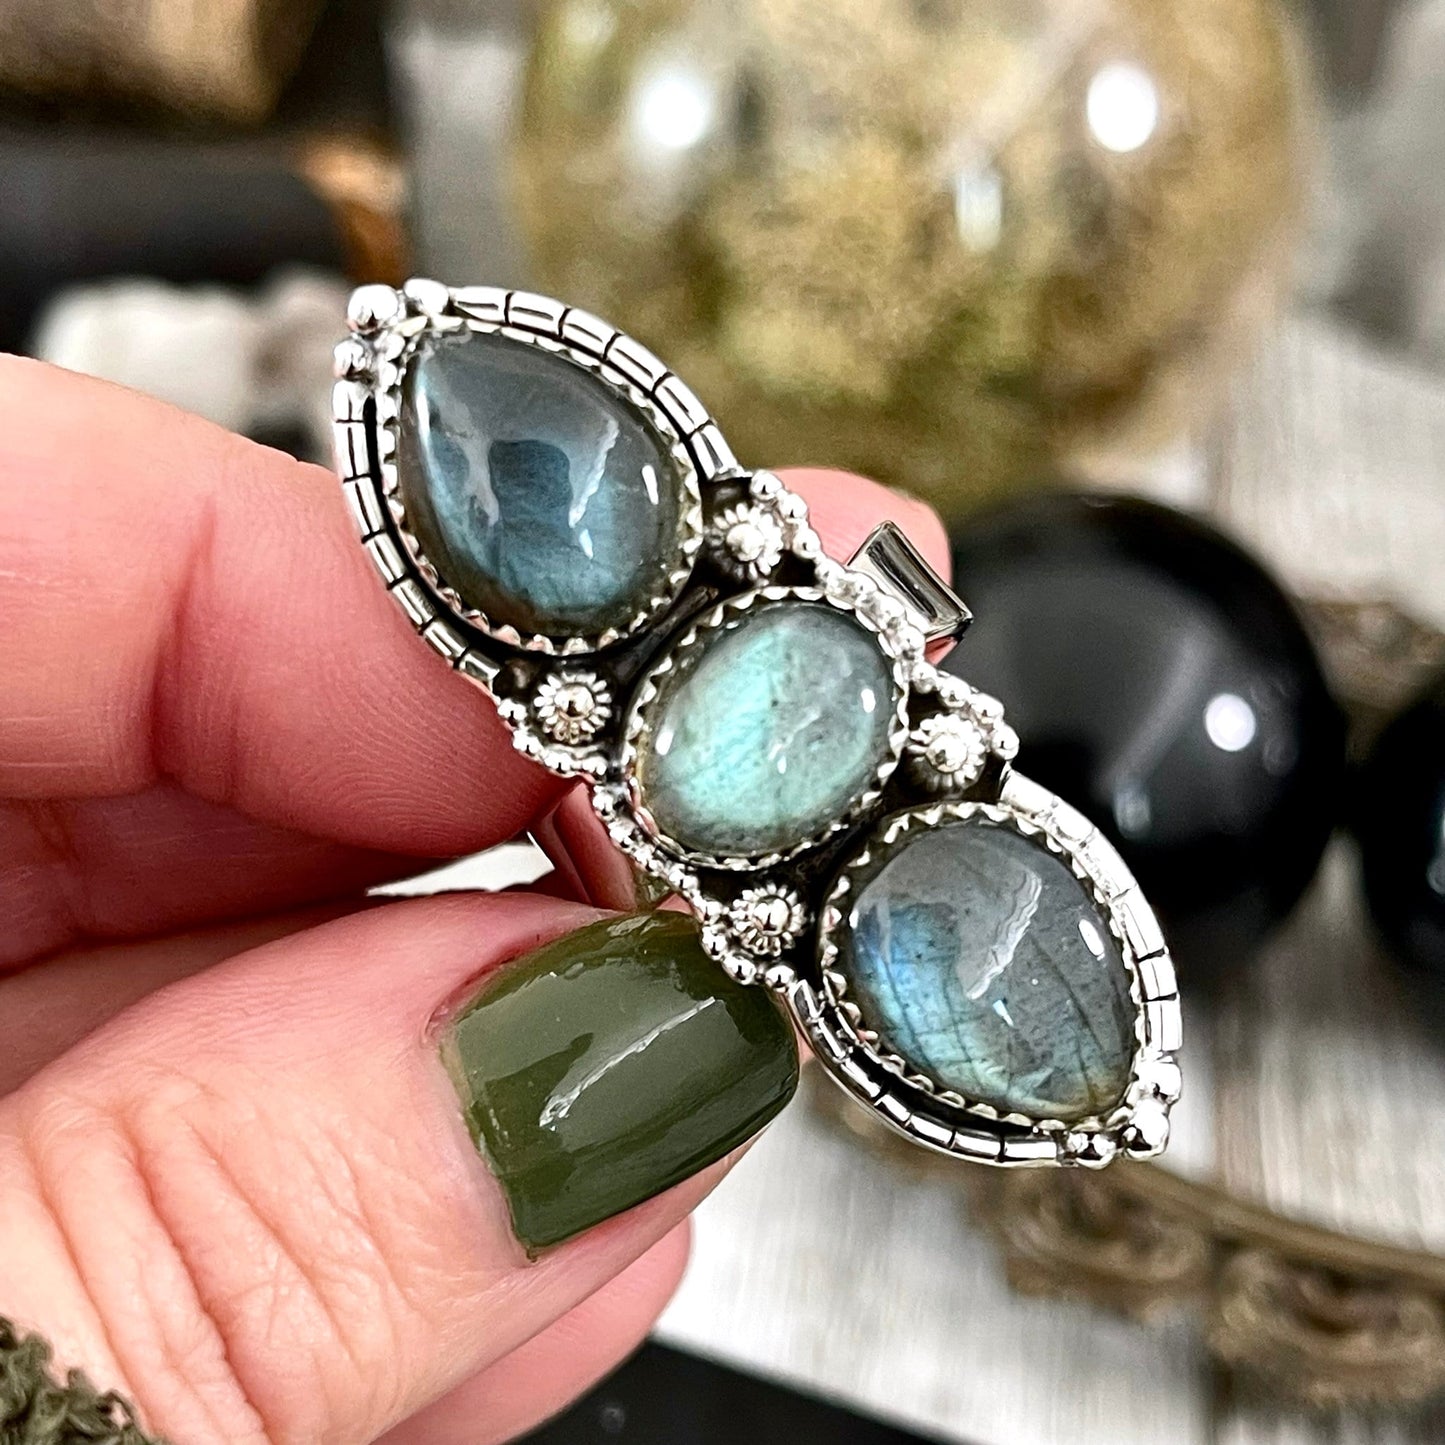 3 Stone Ring, Big Stone Ring, Bohemian Ring, Boho Jewelry, Boho Ring, Crystal Ring, Etsy Id 1143395447, Festival Jewelry, Foxlark Alchemy, Foxlark- Rings, Gift For Woman, Gypsy Ring, Jewelry, Rings, Statement Rings, Wholesale